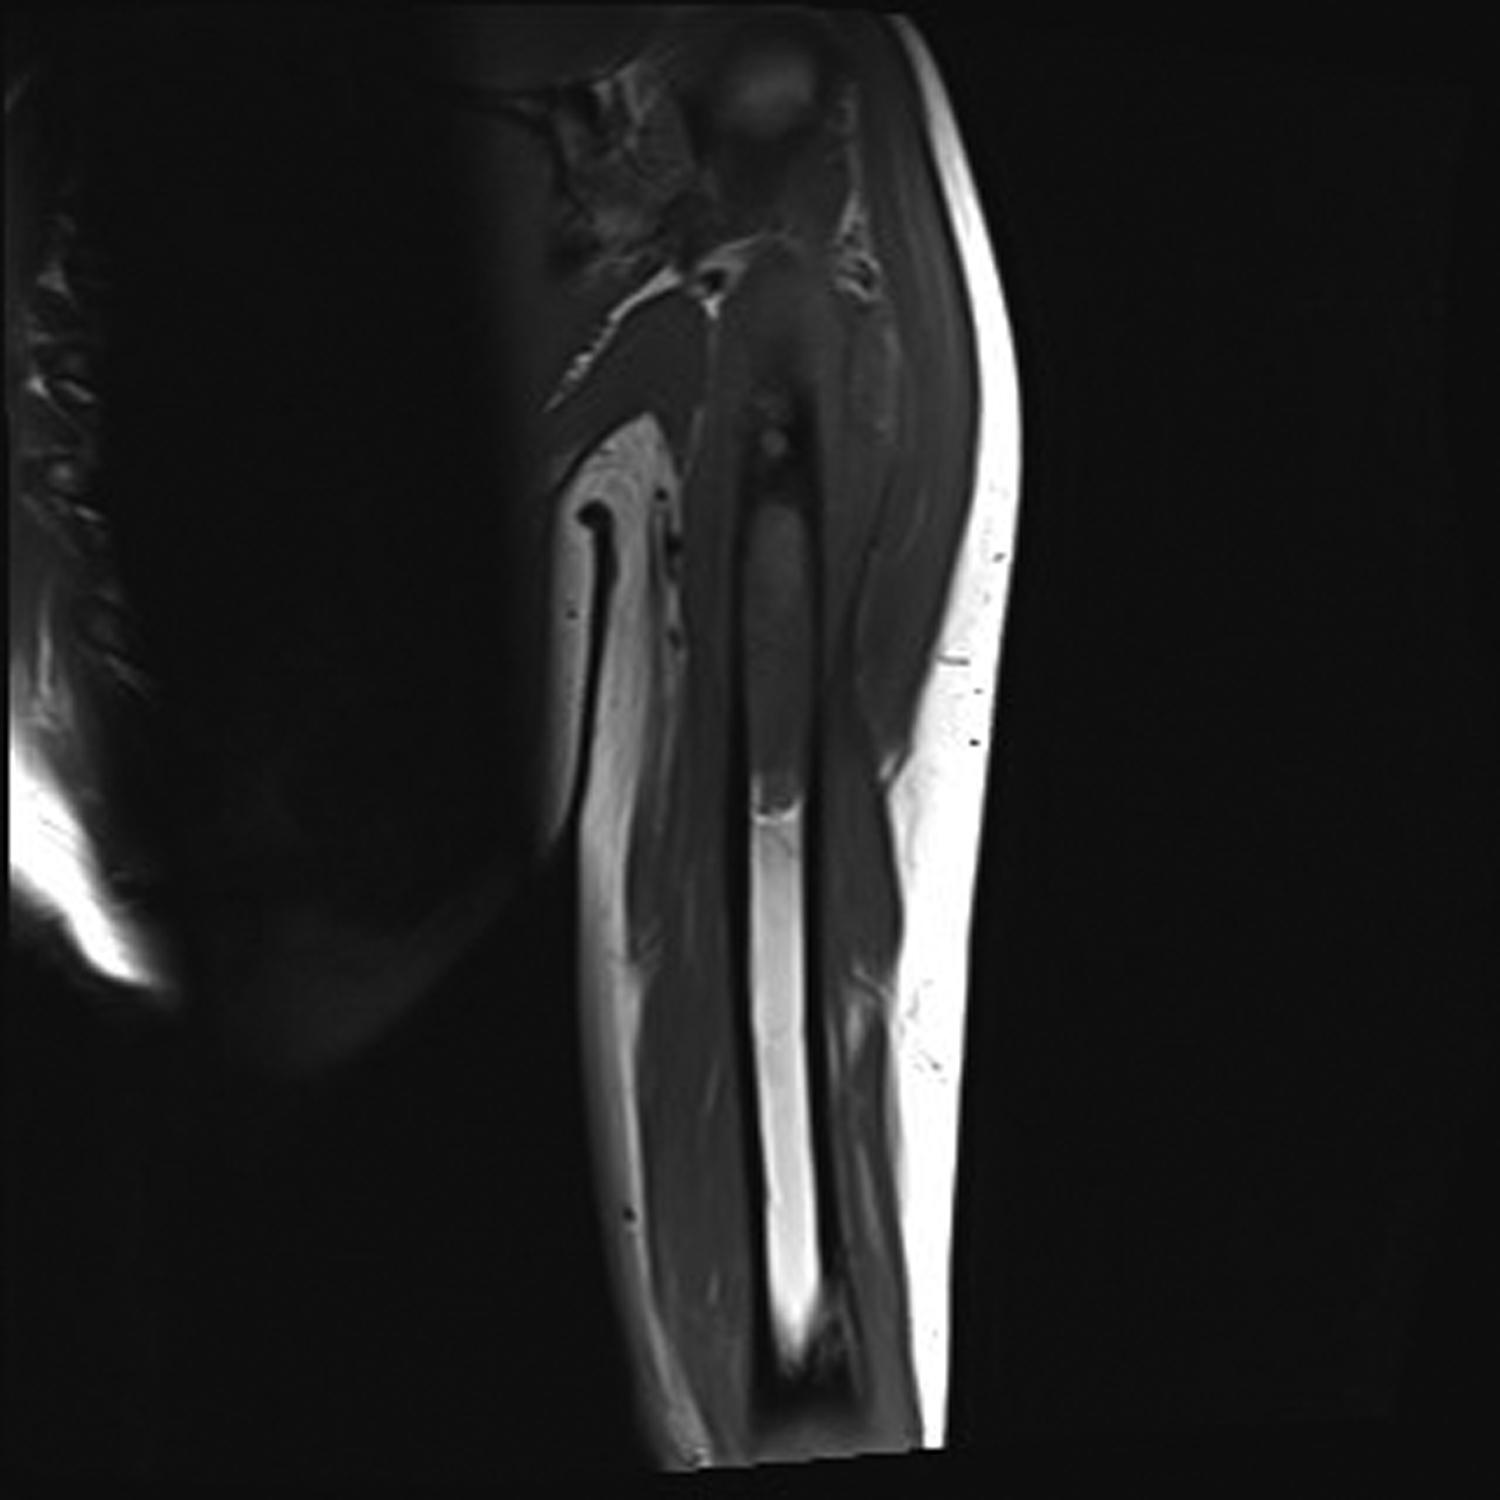 Figure 46.4, A coronal T1-weighted image of the left humerus with normal high signal (bright) fatty marrow inferiorly with an abrupt transition to an abnormal intermediate signal (relatively darker) marrow more superiorly, and this demonstrates well how reliable MRI is to show marrow abnormalities. This was an osteosarcoma.